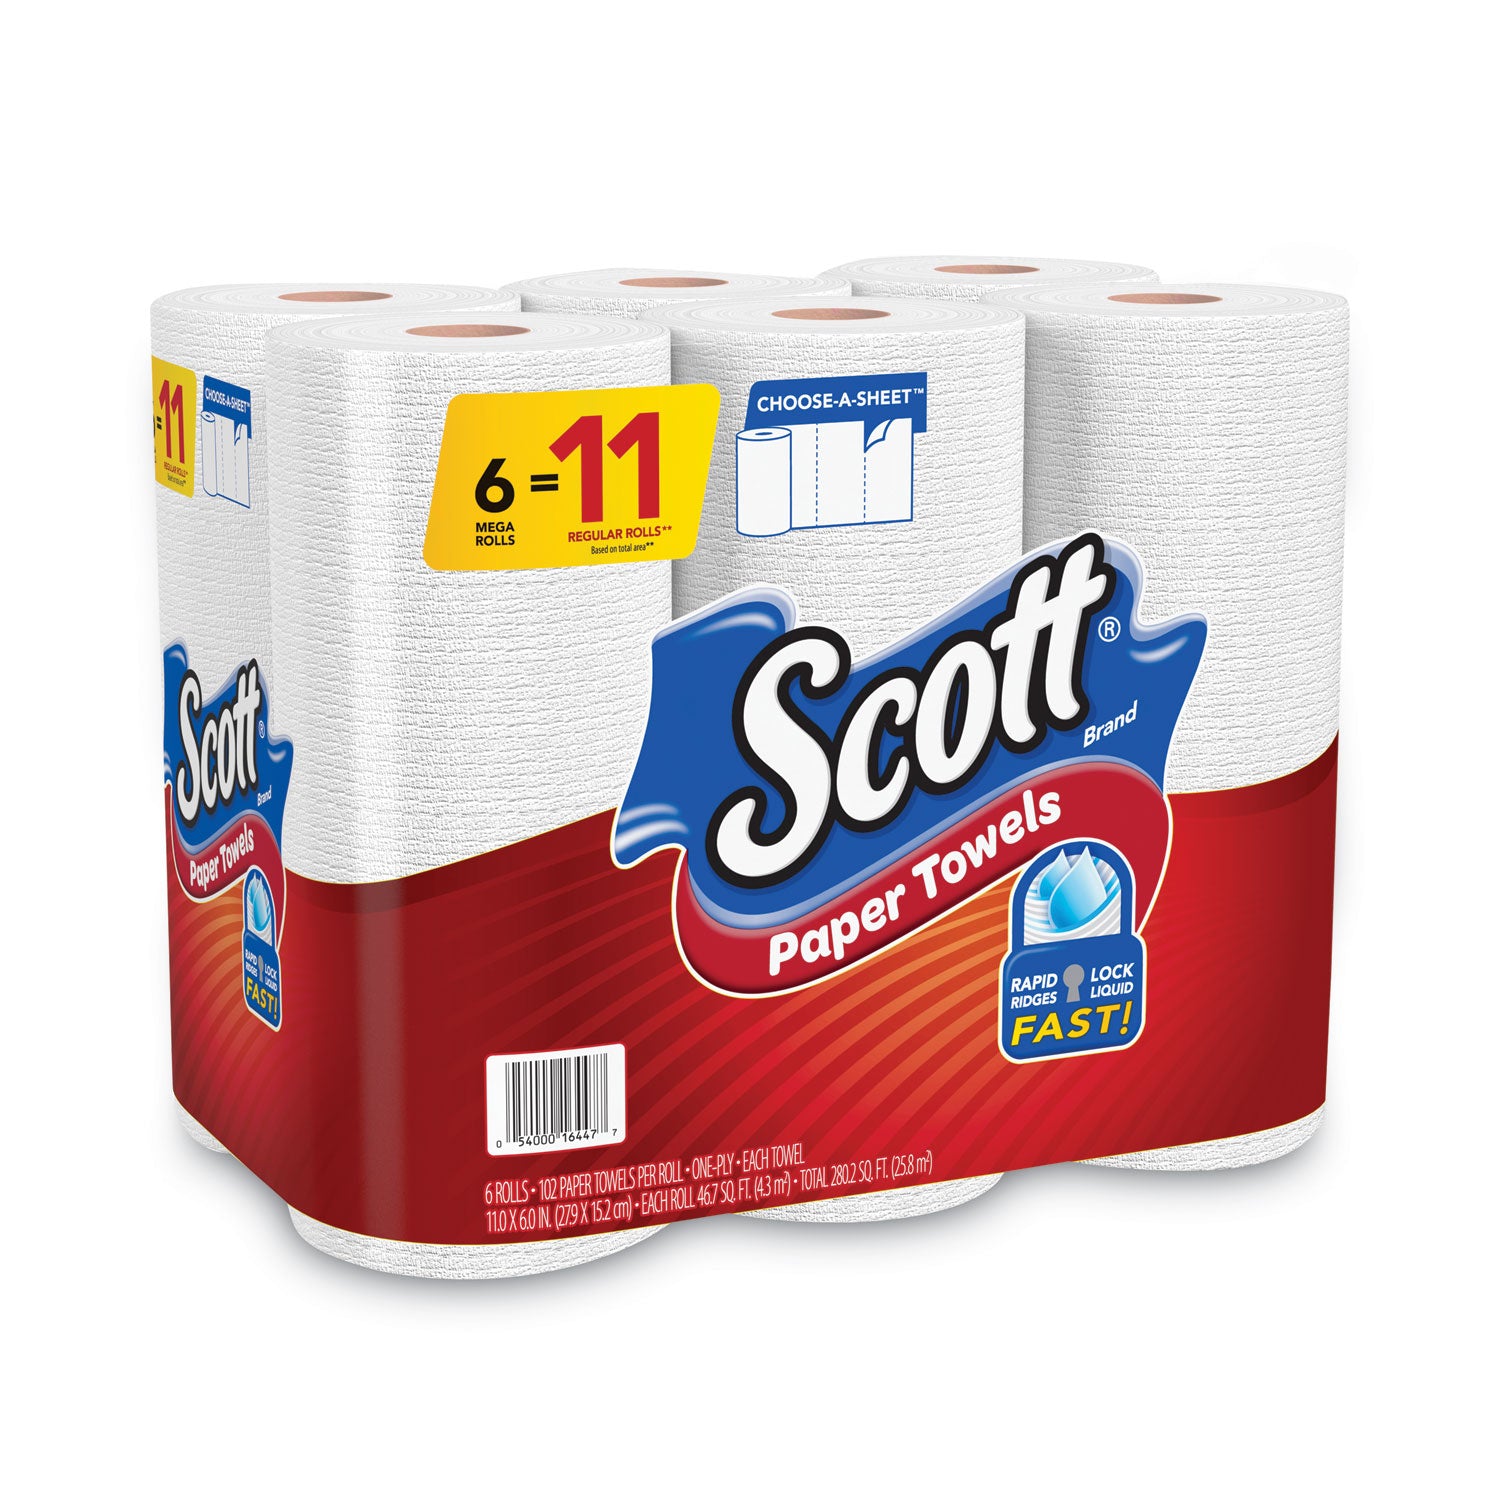 choose-a-size-mega-kitchen-roll-paper-towels-1-ply-100-roll-6-rolls-pack-4-packs-carton_kcc55413 - 2